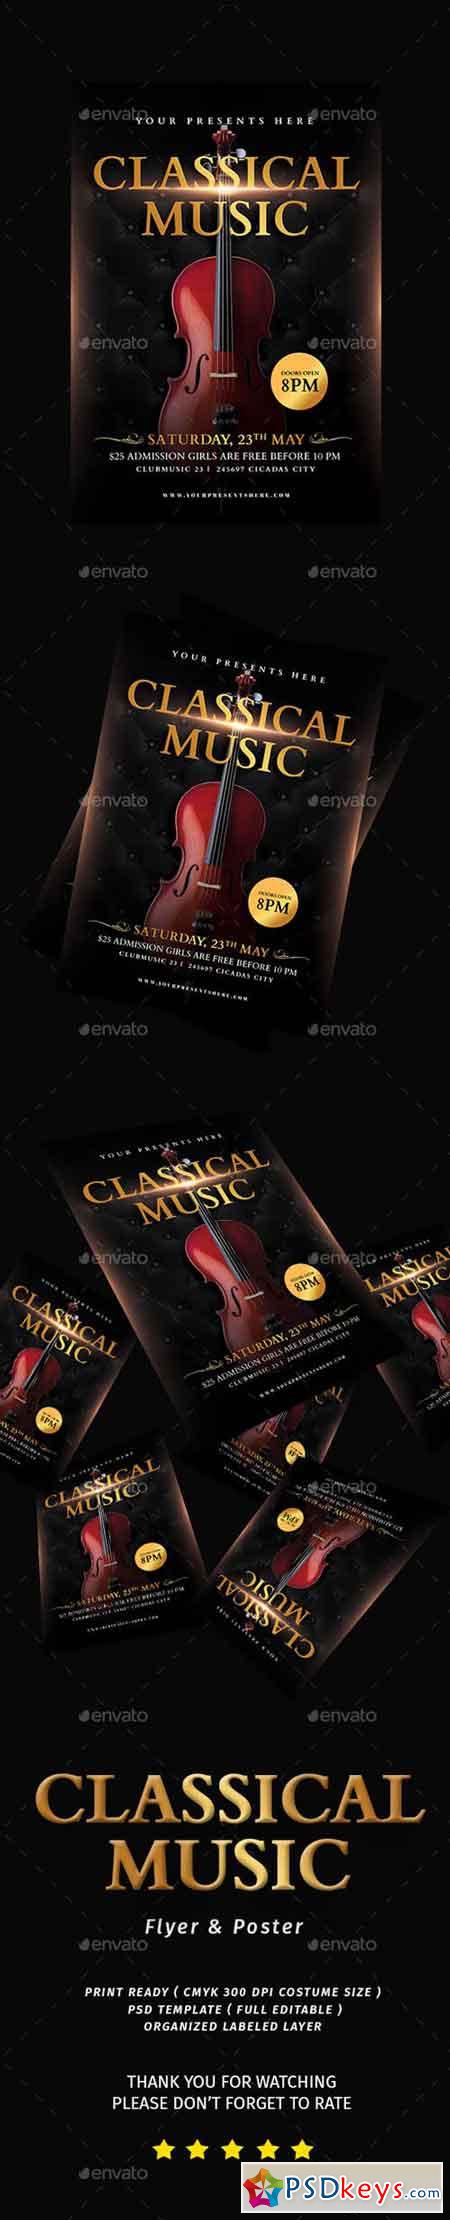 Classical Music Flyer 19749650